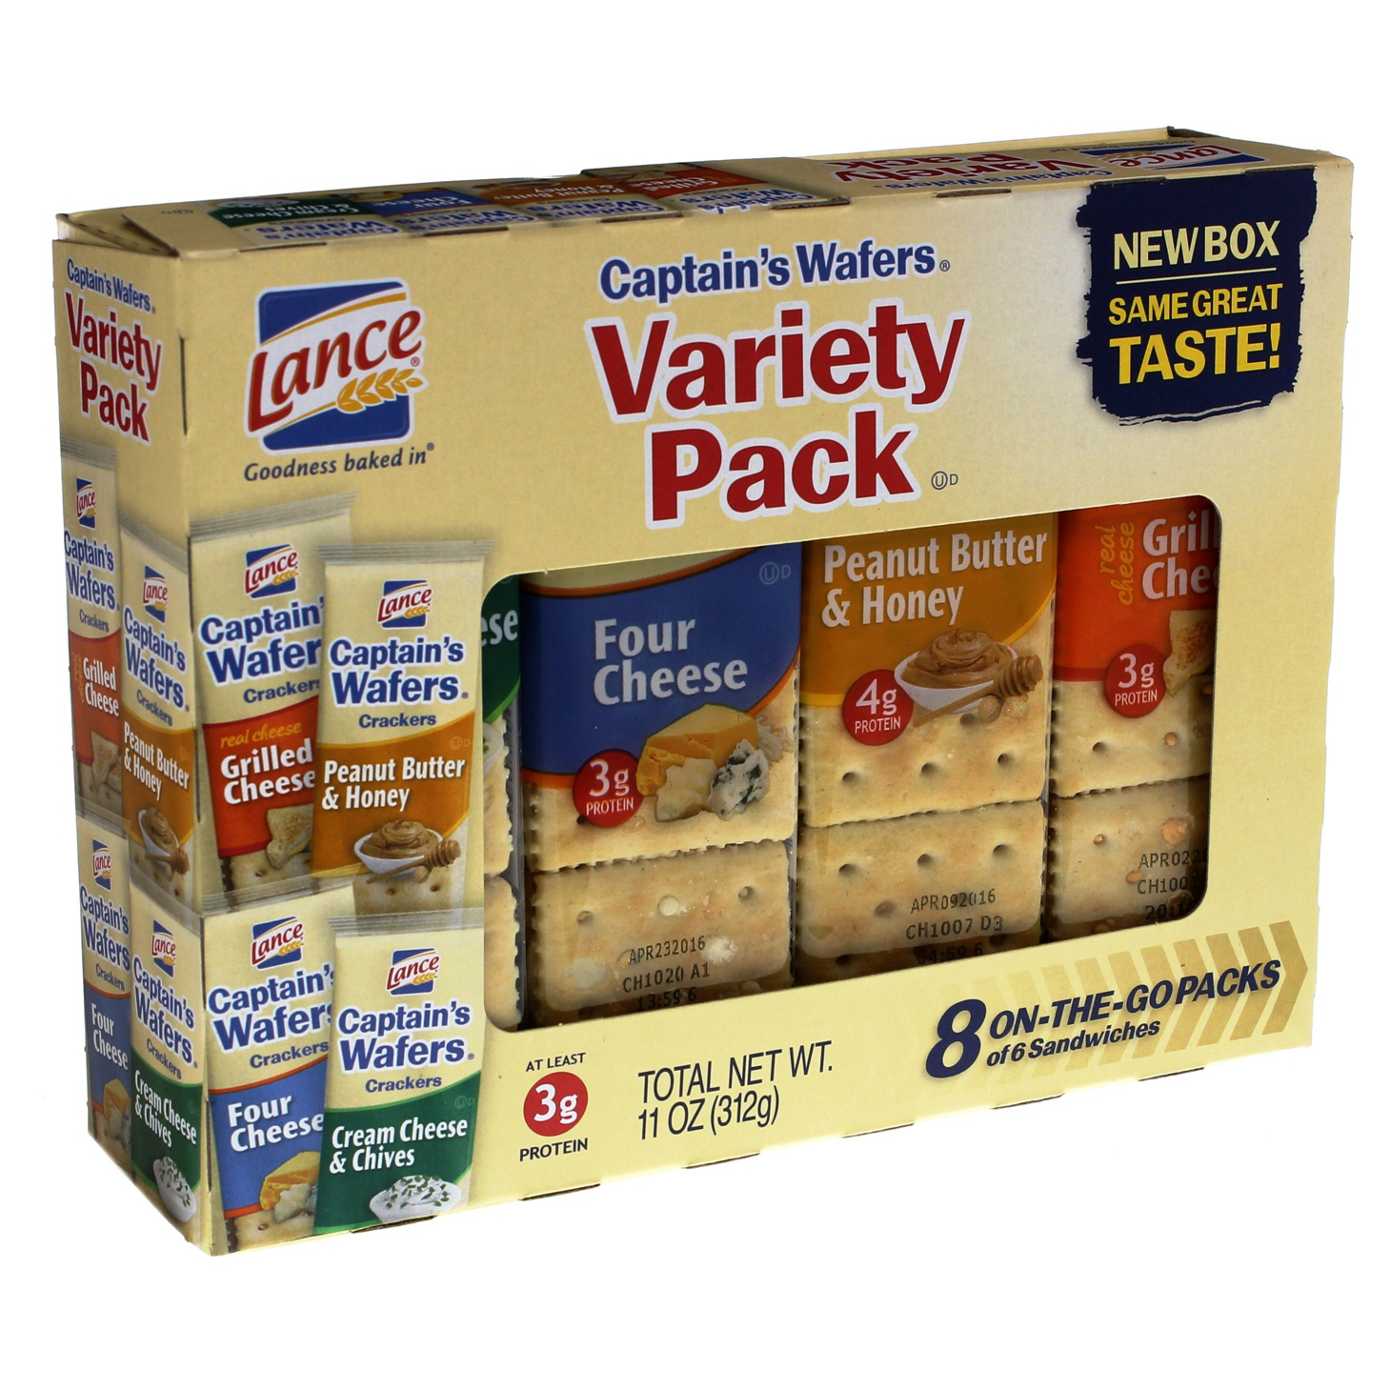 Lance Captain's Wafers Variety Pack Crackers; image 1 of 2